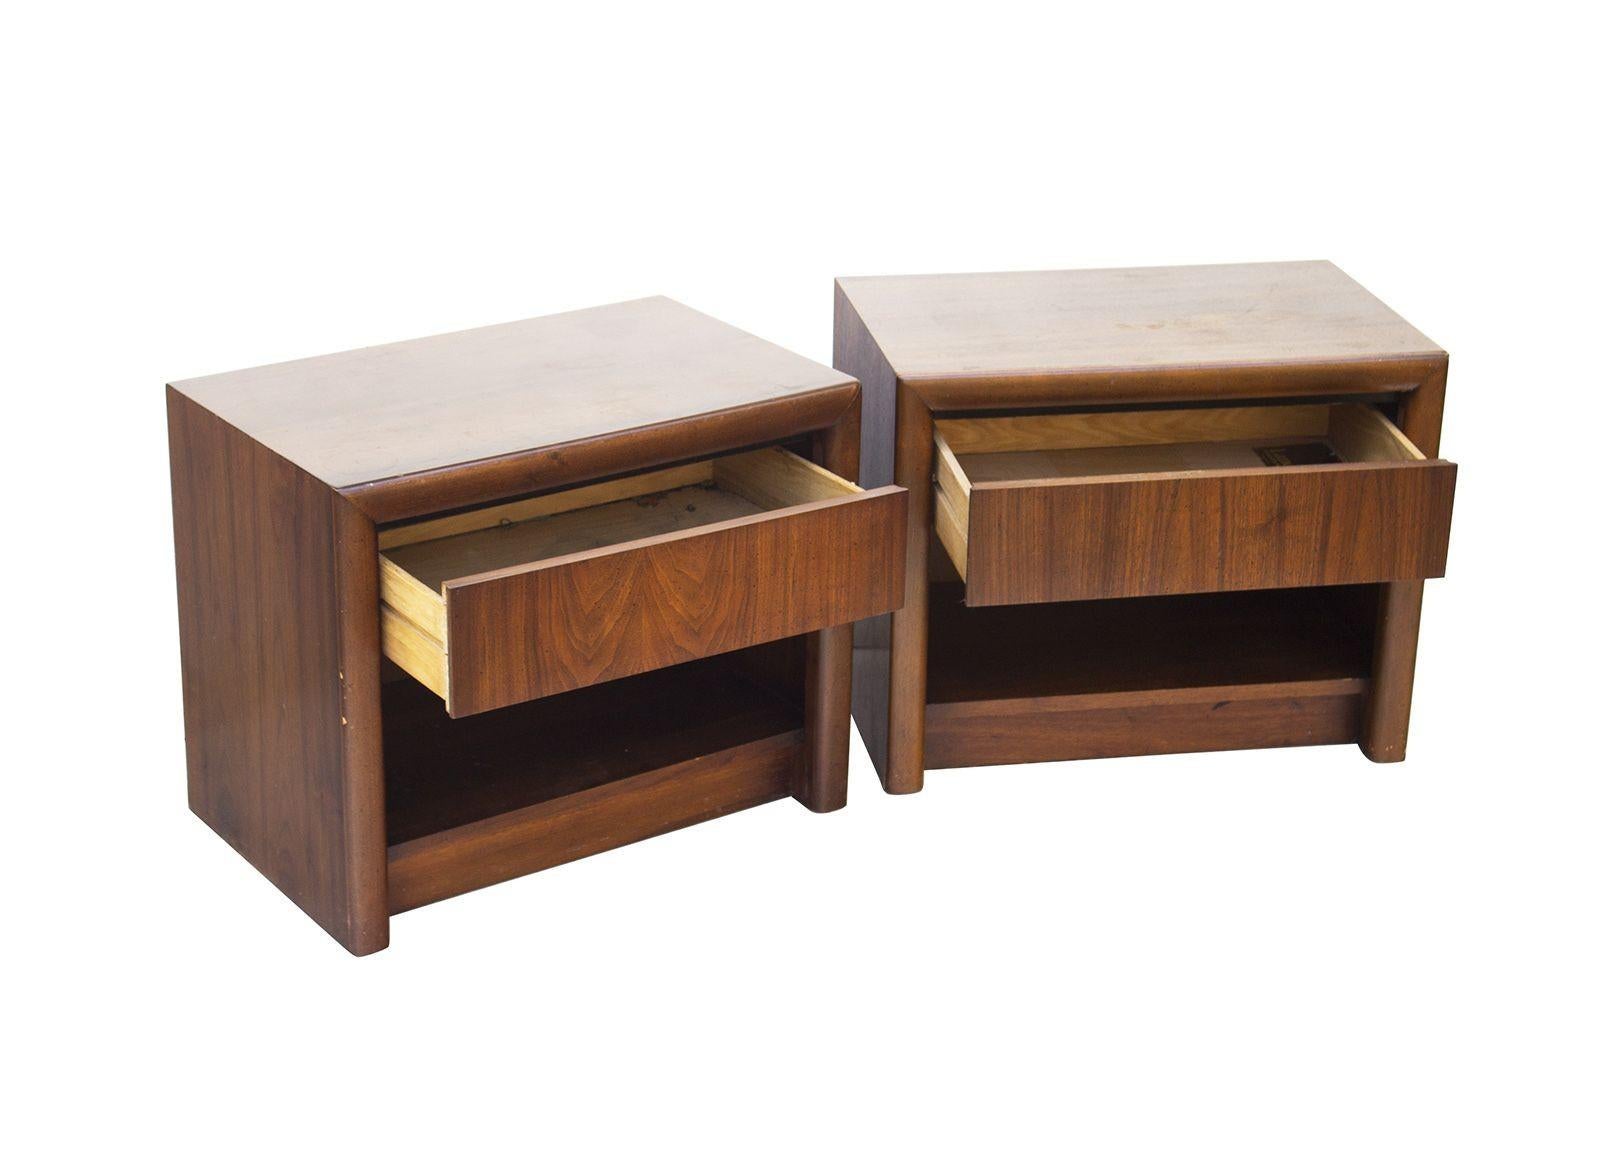 USA, 1970s
Pair of Mid-Century Modern walnut nightstands made by Lane Furniture. Each has a single drawer for concealed storage coupled with an open shelf below. Substantial, well-made pieces in rich, warm American black walnut. 
CONDITION NOTES: